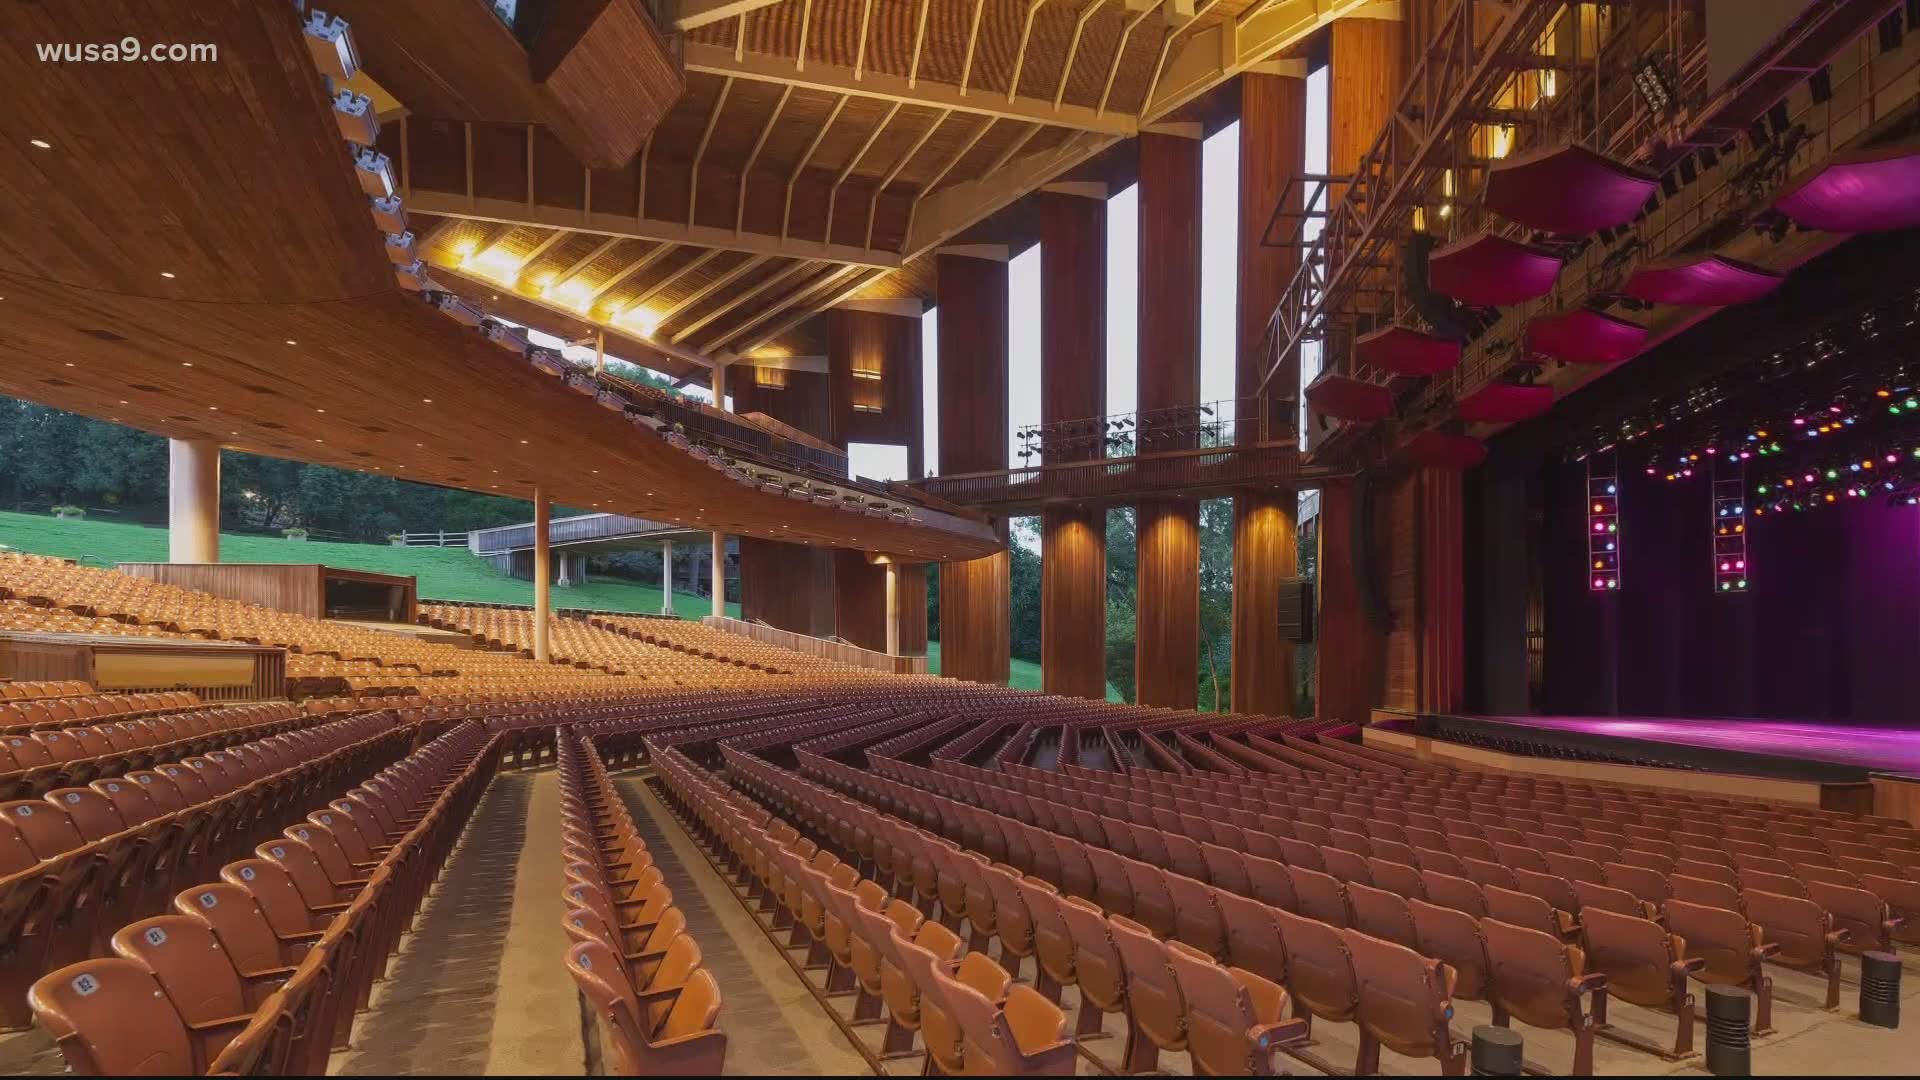 The performance venue's CEO said Virginia Gov. Northam plans to ease some capacity restrictions at outdoor sites has given Wolf Trap a lot of hope.